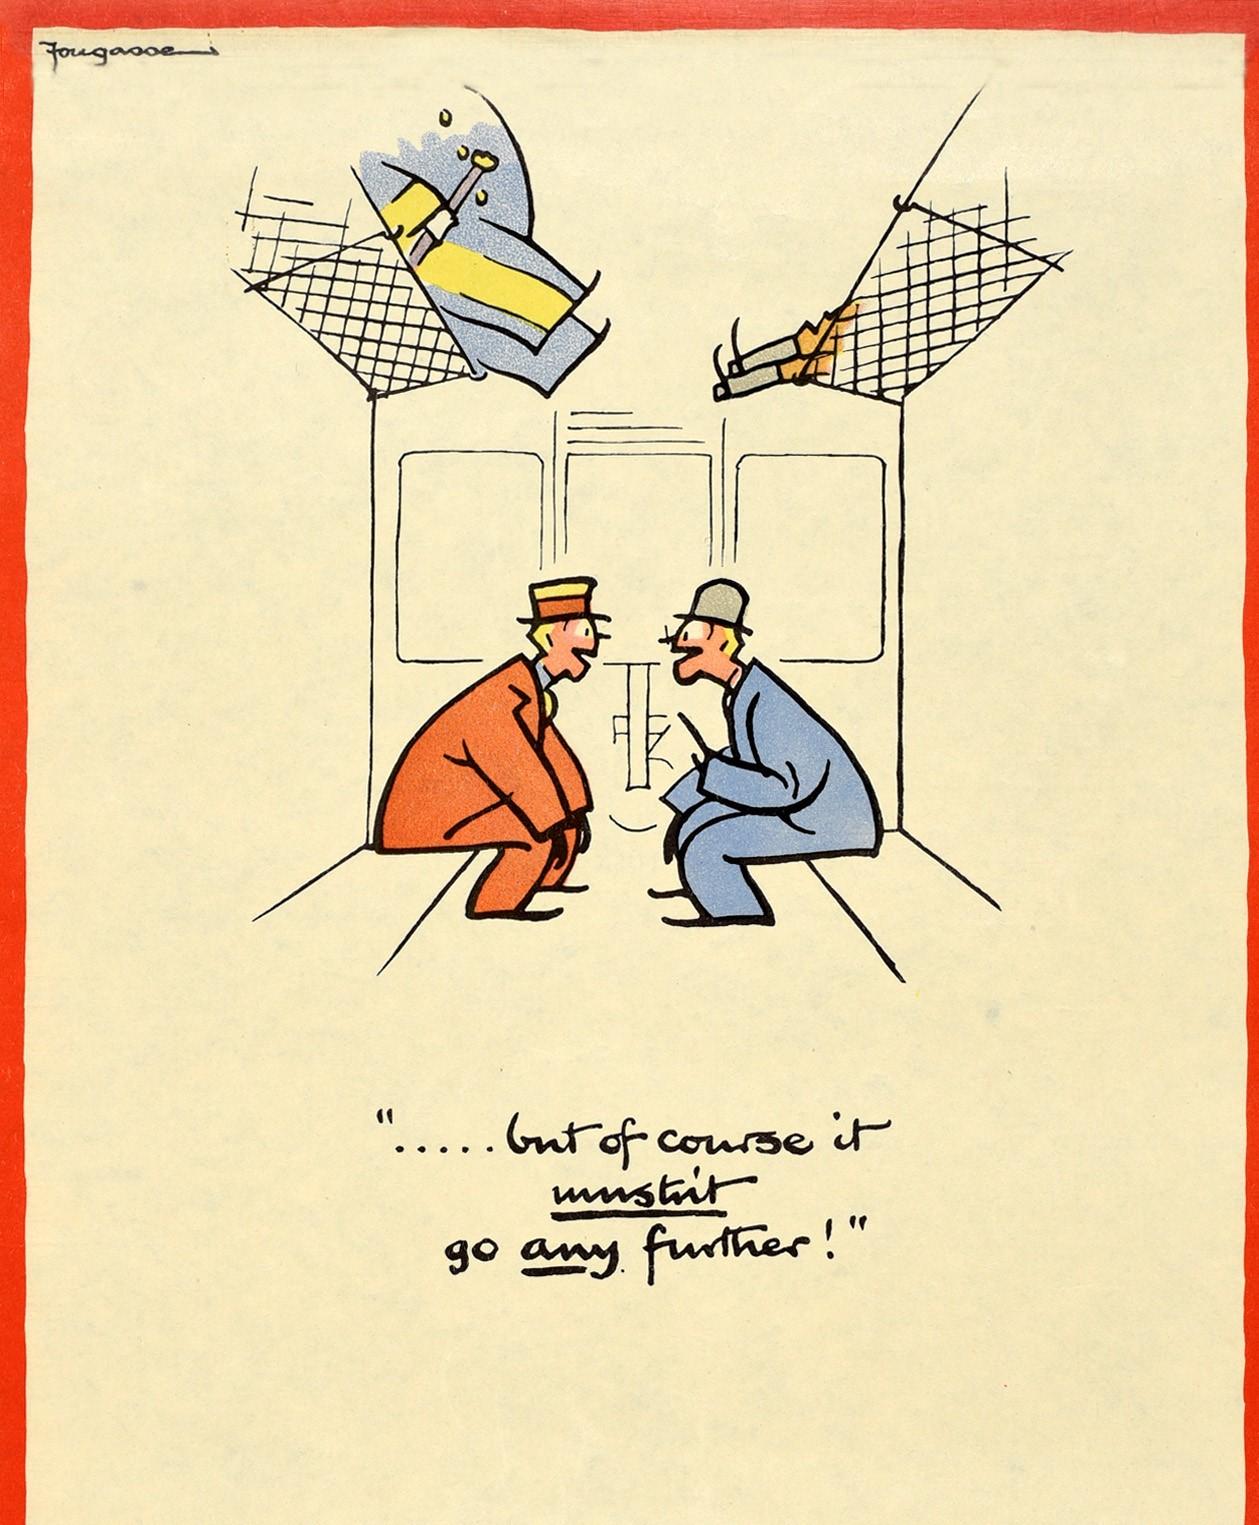 Original Vintage Poster Careless Talk Costs Lives WWII Train Design Warning - Print by Fougasse (Cyril Kenneth Bird)